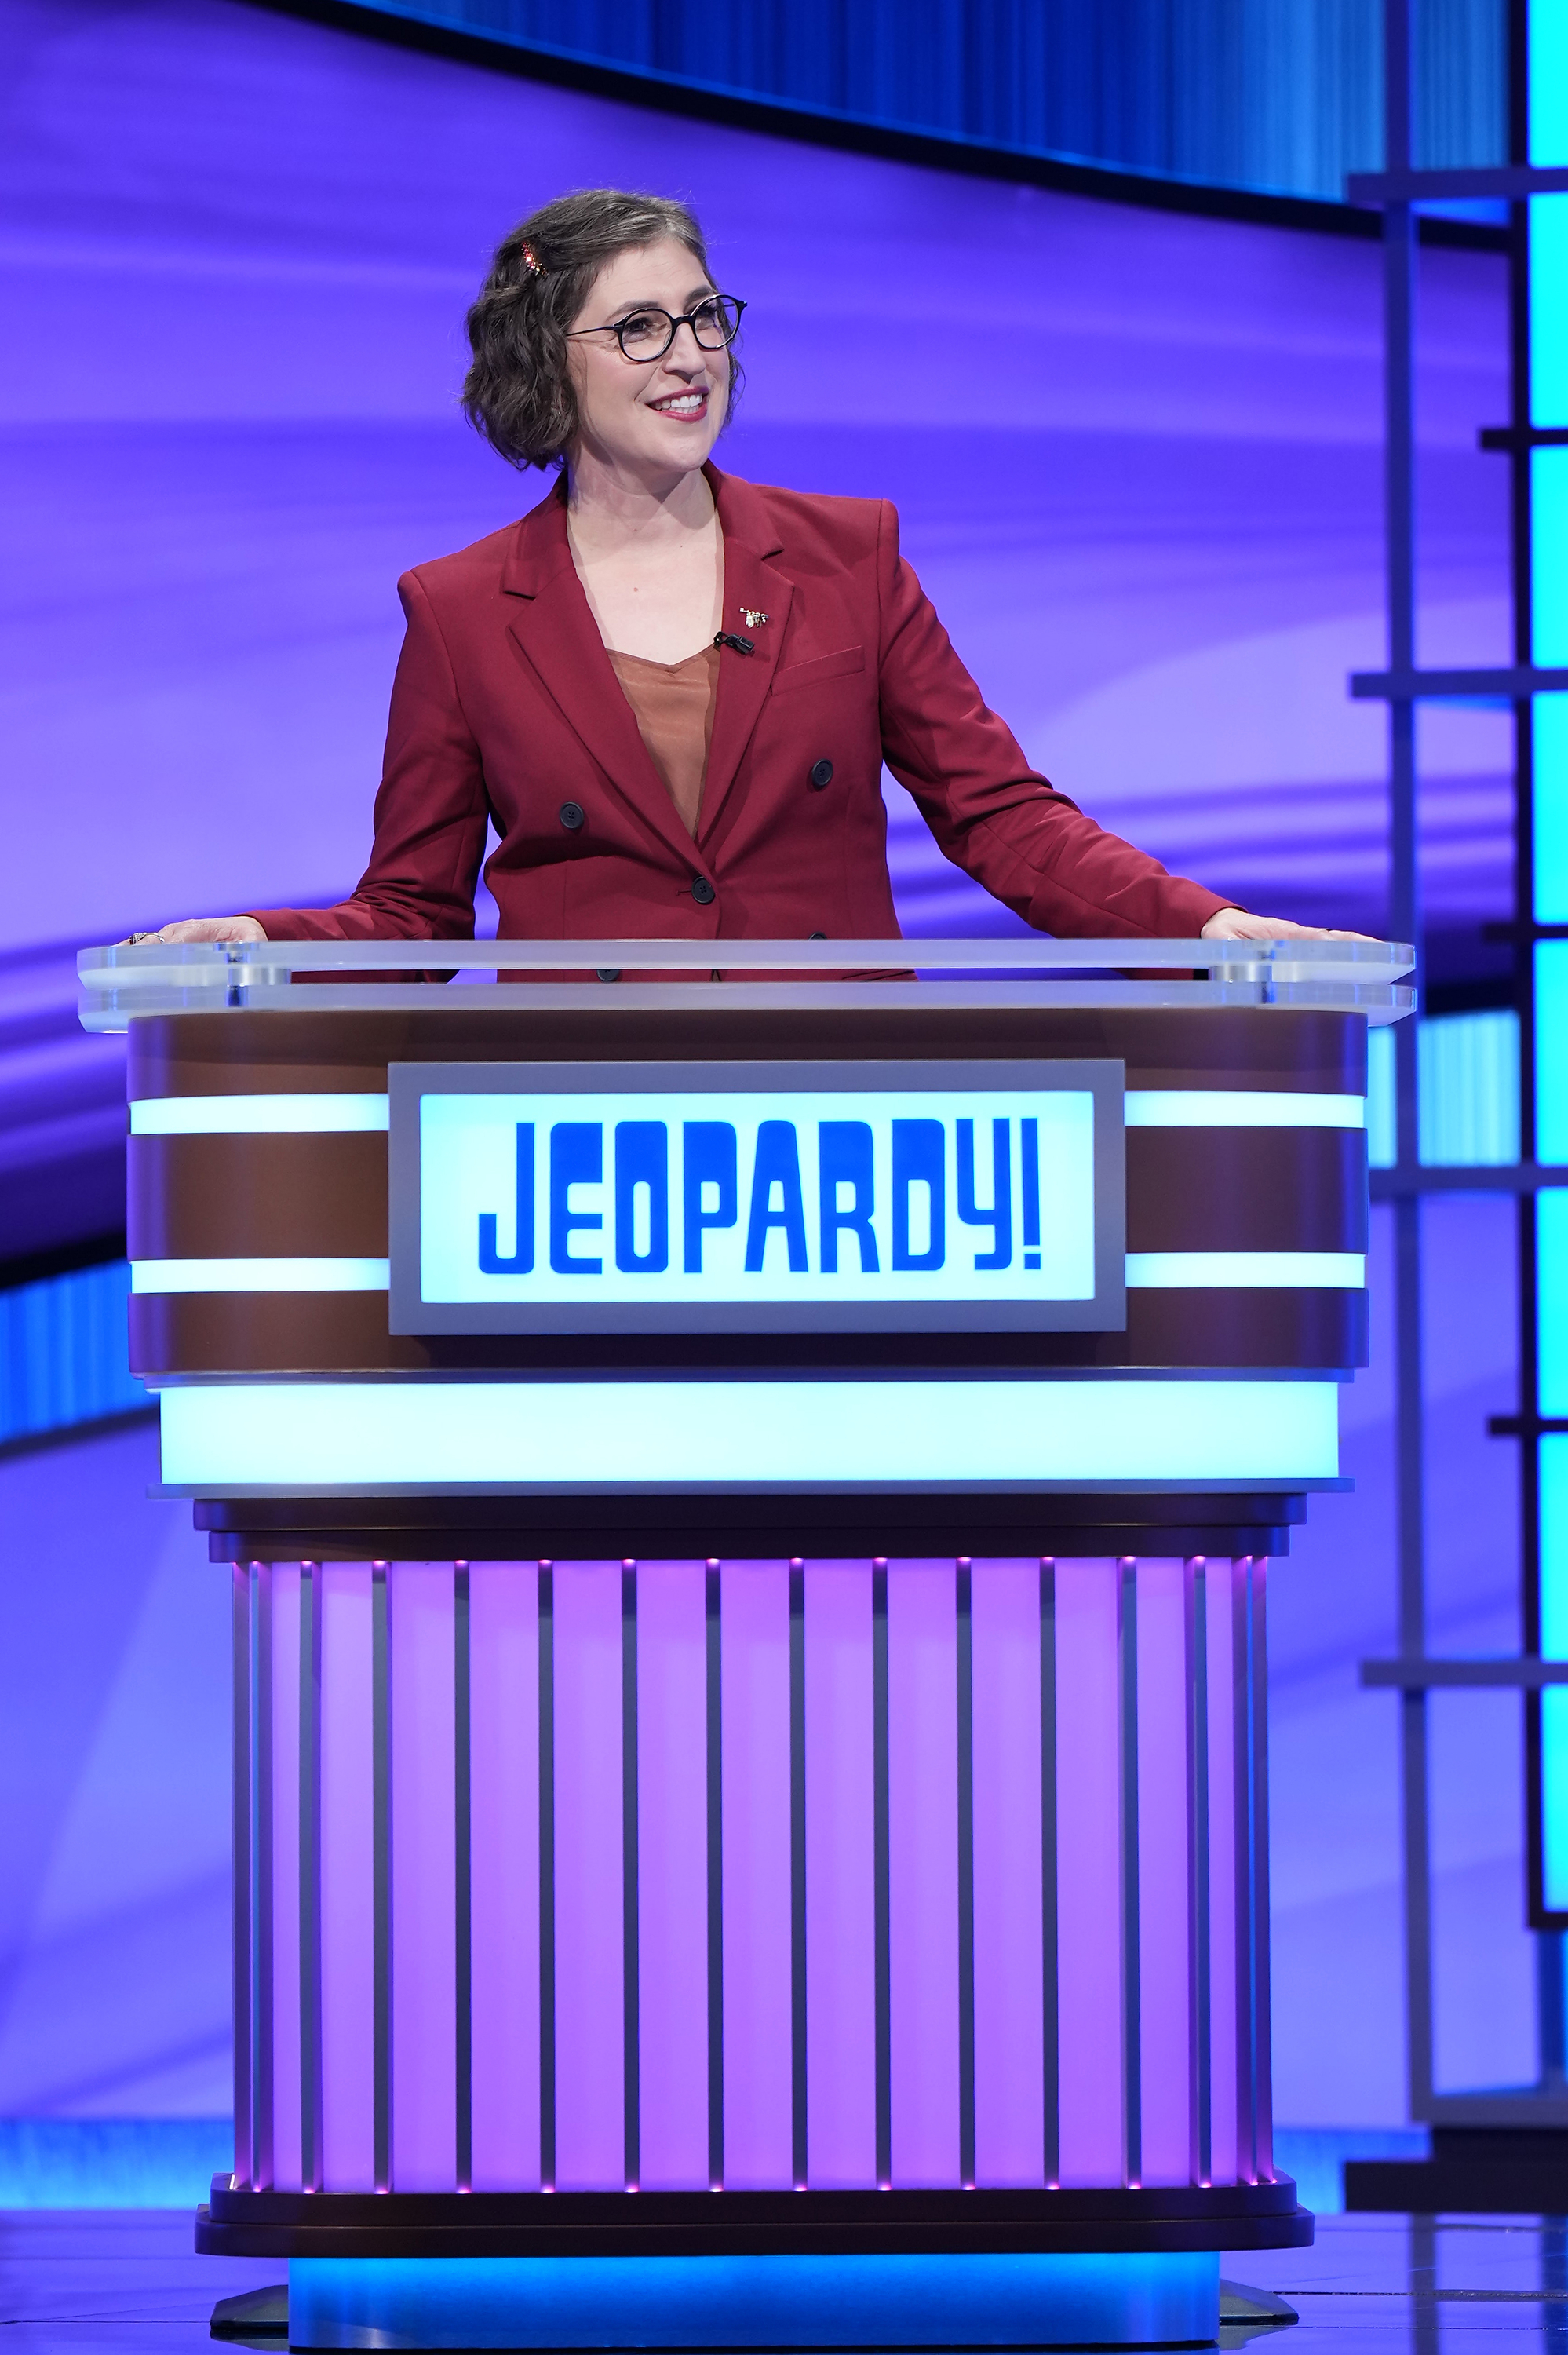 Ken Jennings is now the sole host of Jeopardy! and Mayim removed 'co-host' from her Instagram bio